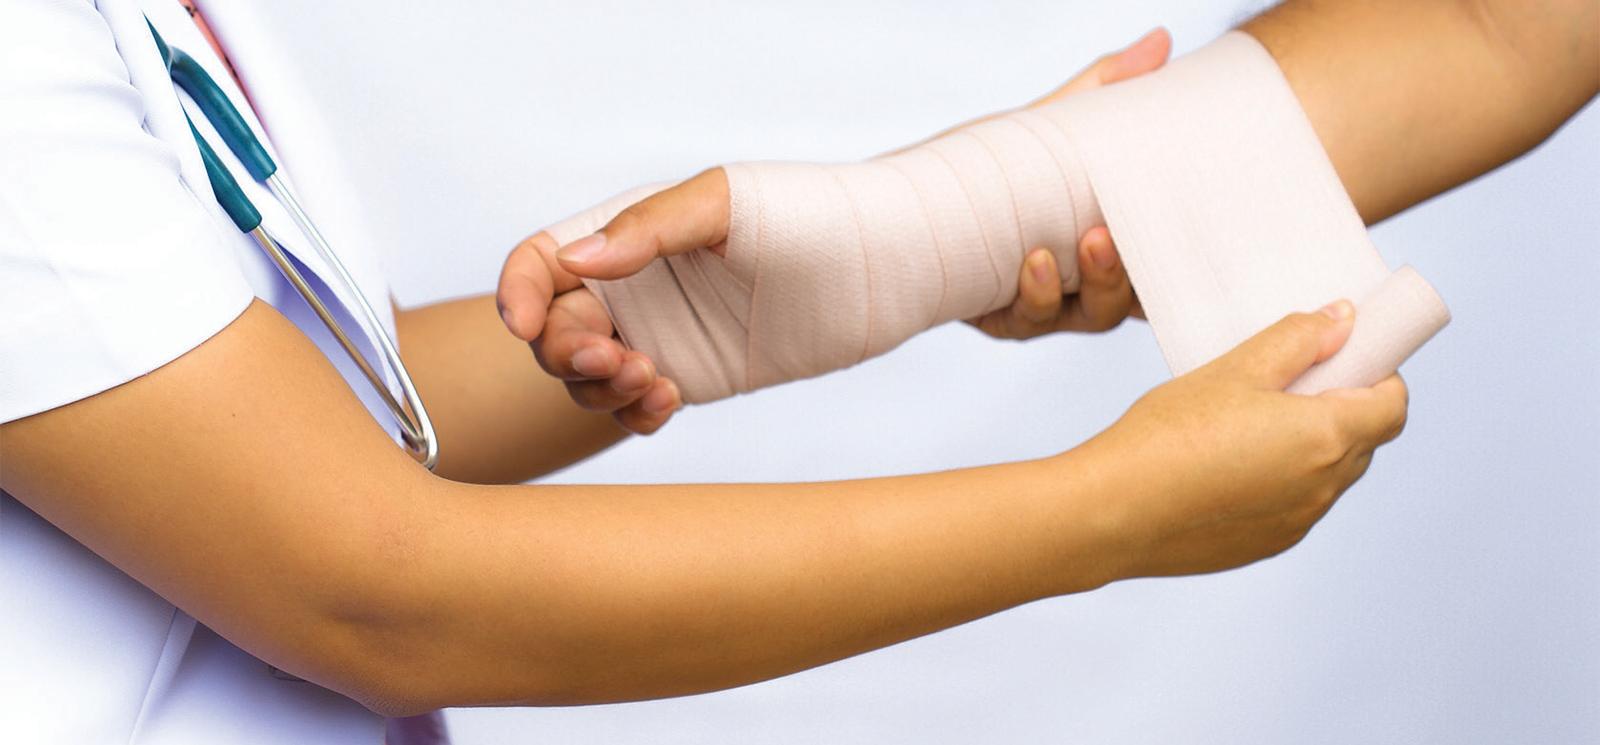 The Value of Medical Technology in Wound Treatment